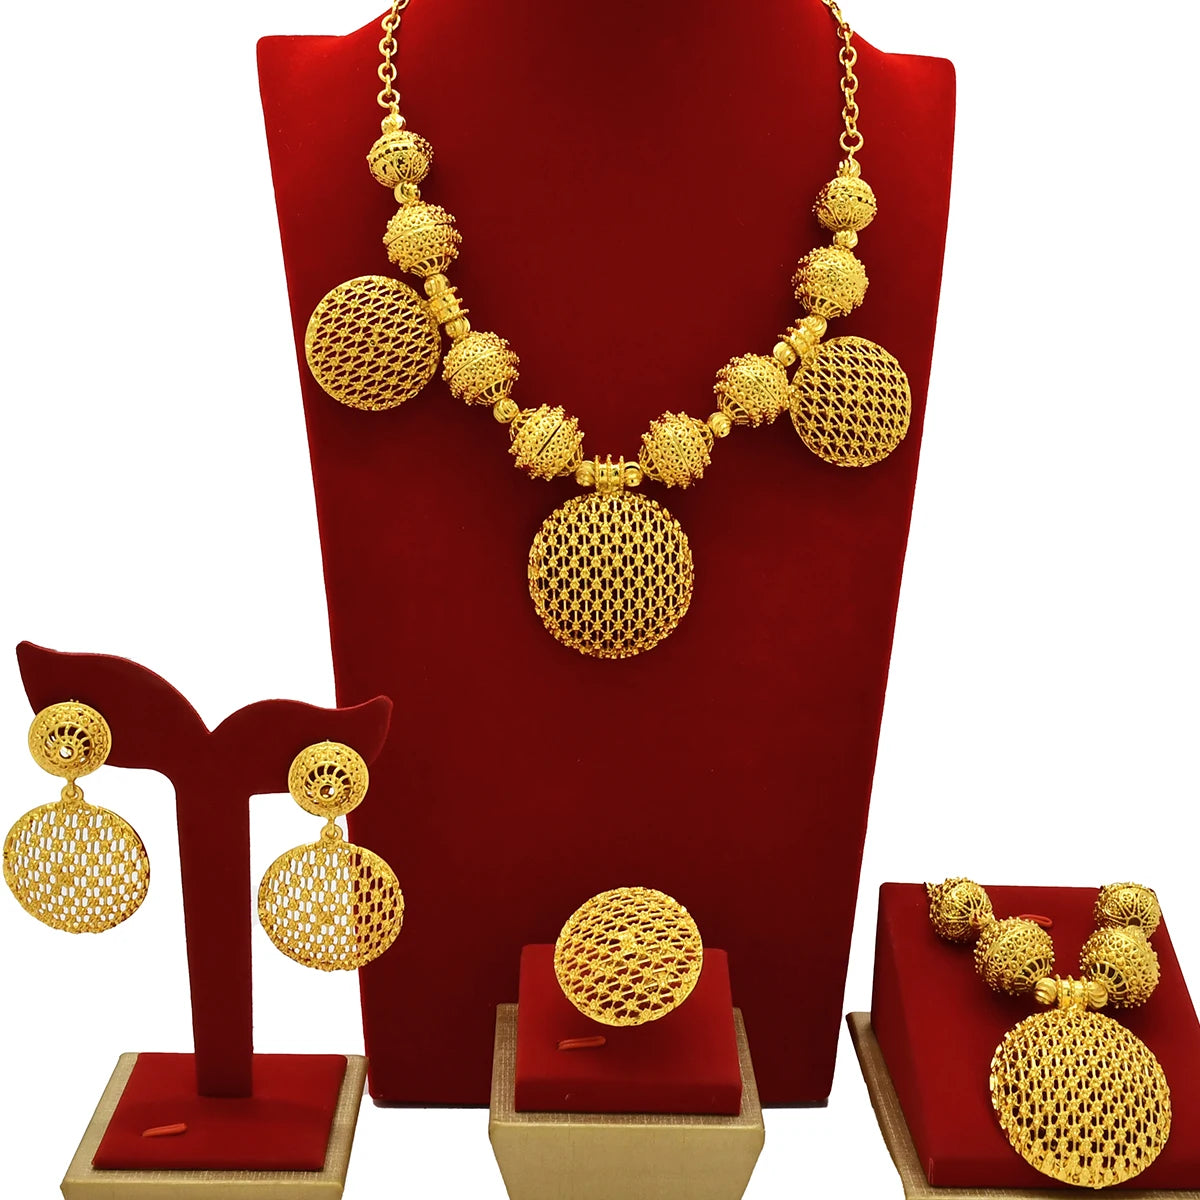 Fashion Dubai Gold Plated Jewelry Set for Women Nigeria Wedding Necklace Earrings Bracelet Ring Bridal Jewellry Accessories 24K - Hiron Store